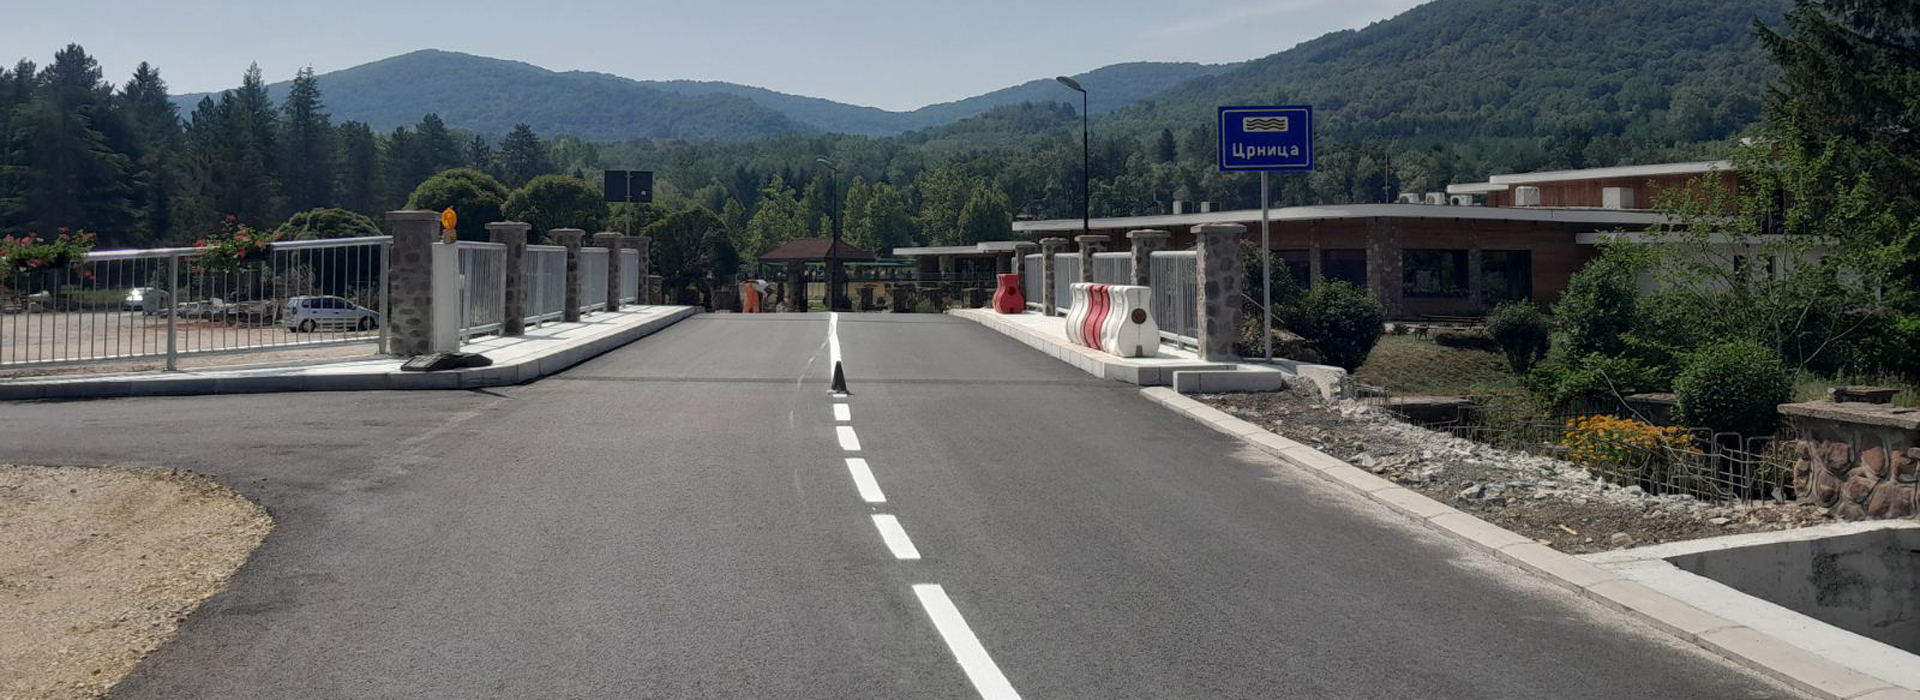 COMPLETED CONSTRUCTION OF THE NEW BRIDGE OVER THE CRNICA RIVER IN THE TOWN OF SISEVAC